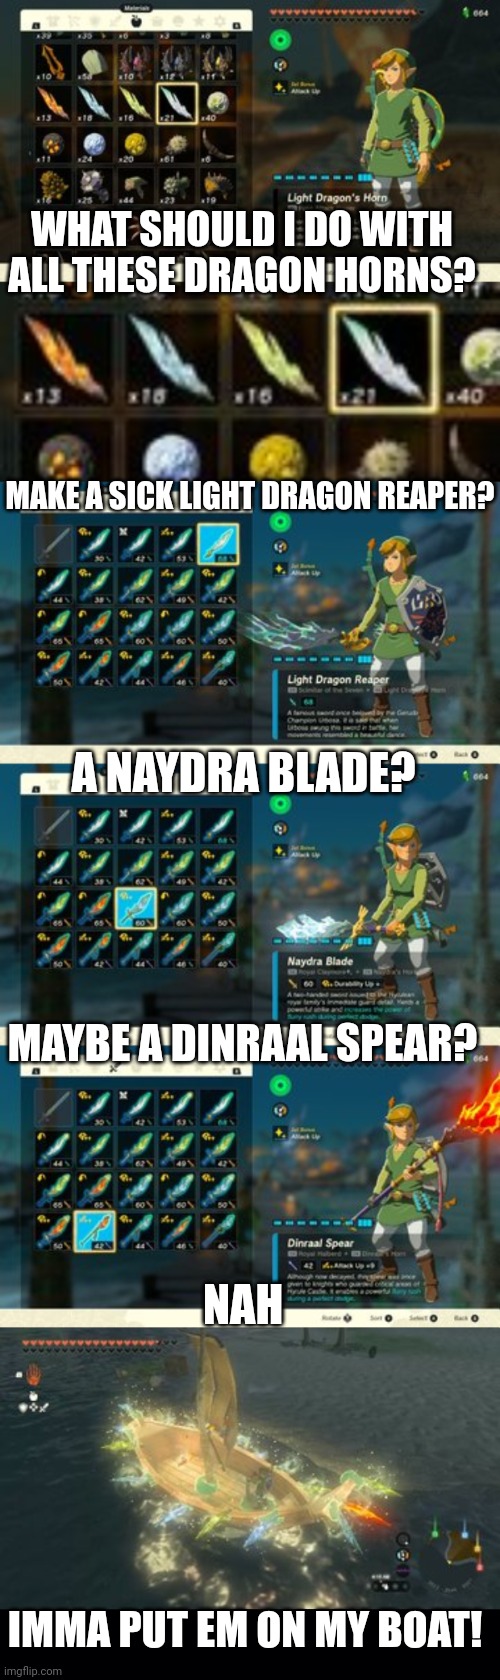 MAYBE I SPEND TOO MUCH TIME WITH THE DRAGONS | WHAT SHOULD I DO WITH ALL THESE DRAGON HORNS? MAKE A SICK LIGHT DRAGON REAPER? A NAYDRA BLADE? MAYBE A DINRAAL SPEAR? NAH; IMMA PUT EM ON MY BOAT! | image tagged in the legend of zelda breath of the wild,tears of the kingdom,totk,link,dragons,the legend of zelda | made w/ Imgflip meme maker